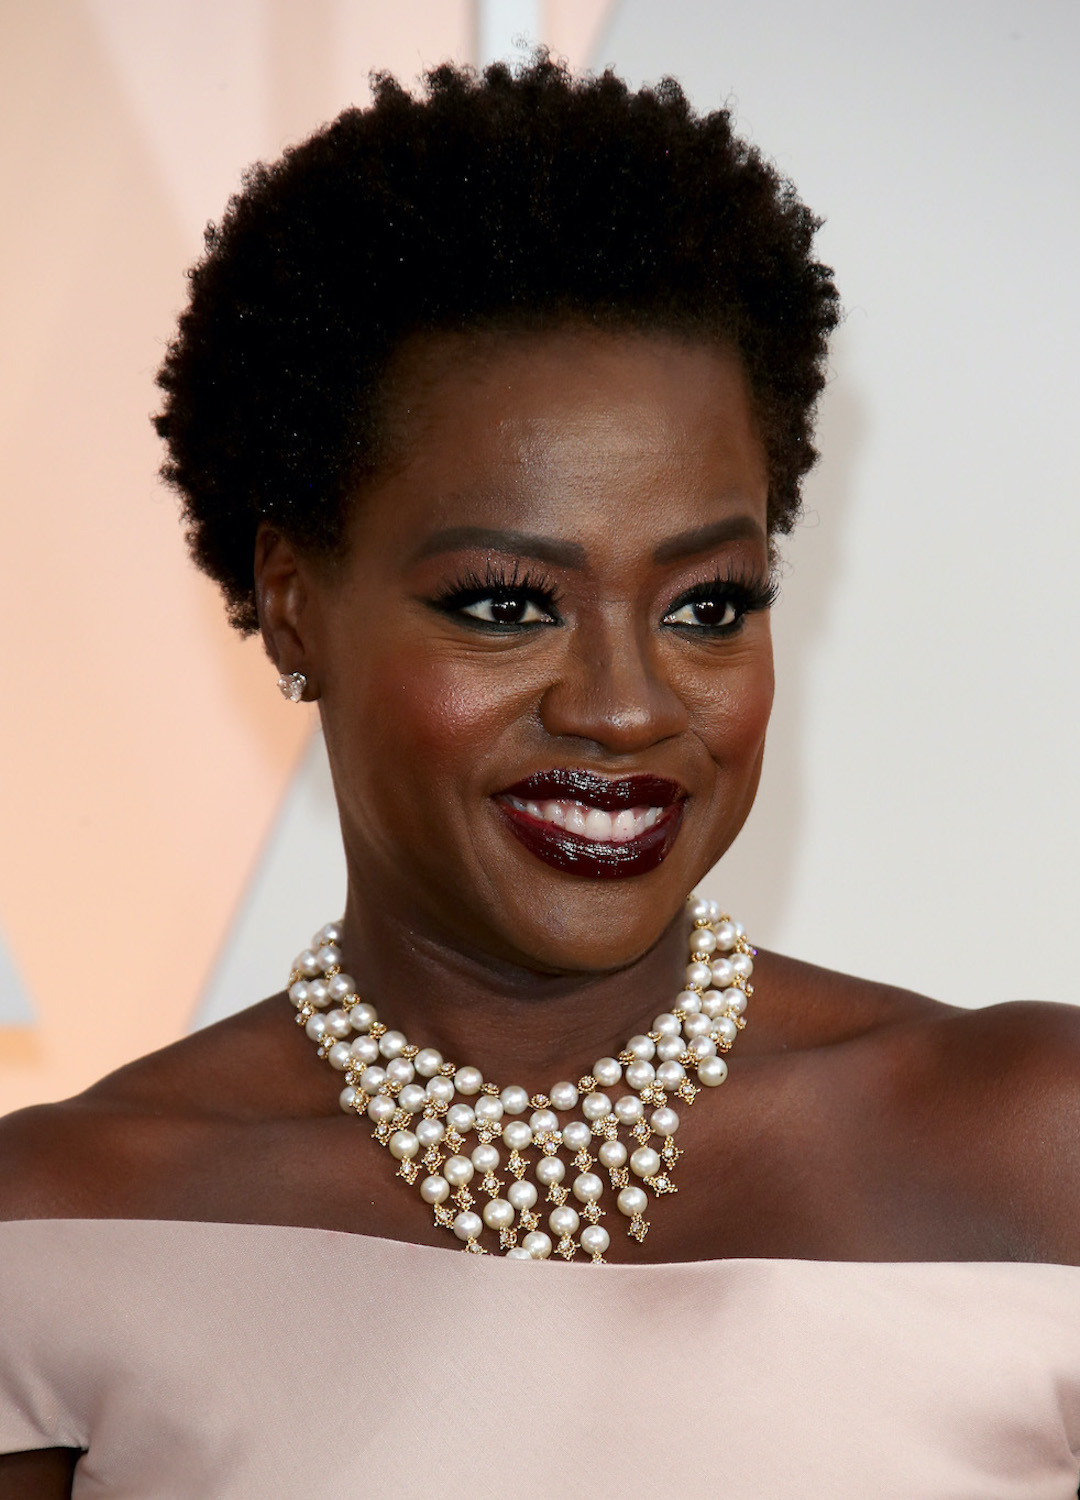 Viola Davis arrives at the 87th Annual Academy Awards at Hollywood & Highland Center on February 22, 2015 in Los Angeles, California